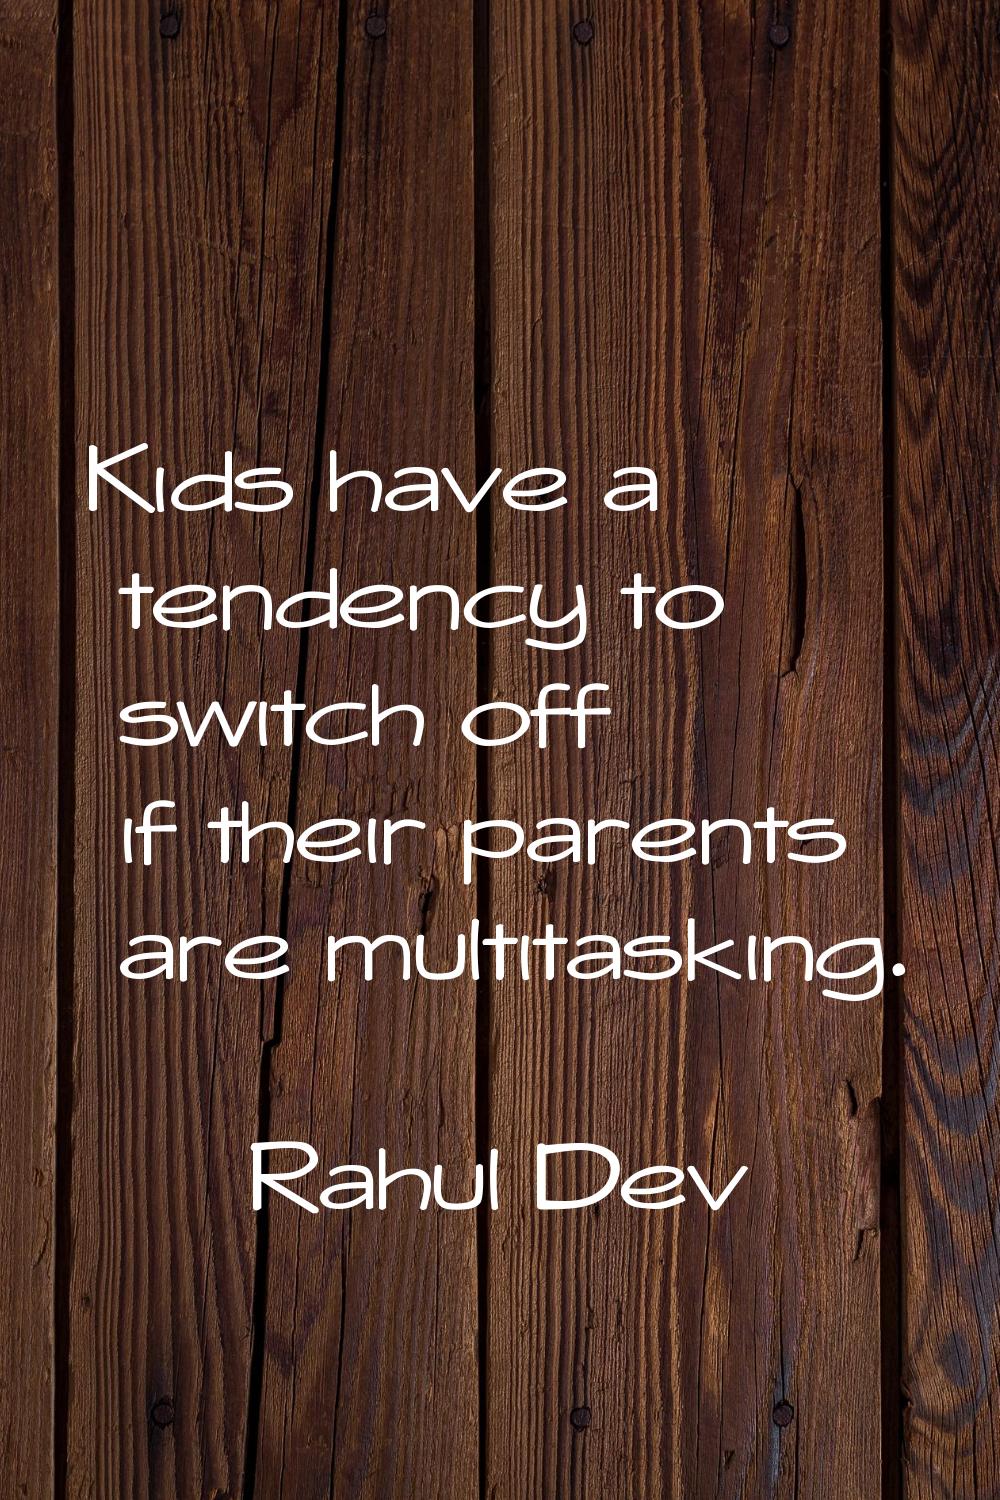 Kids have a tendency to switch off if their parents are multitasking.